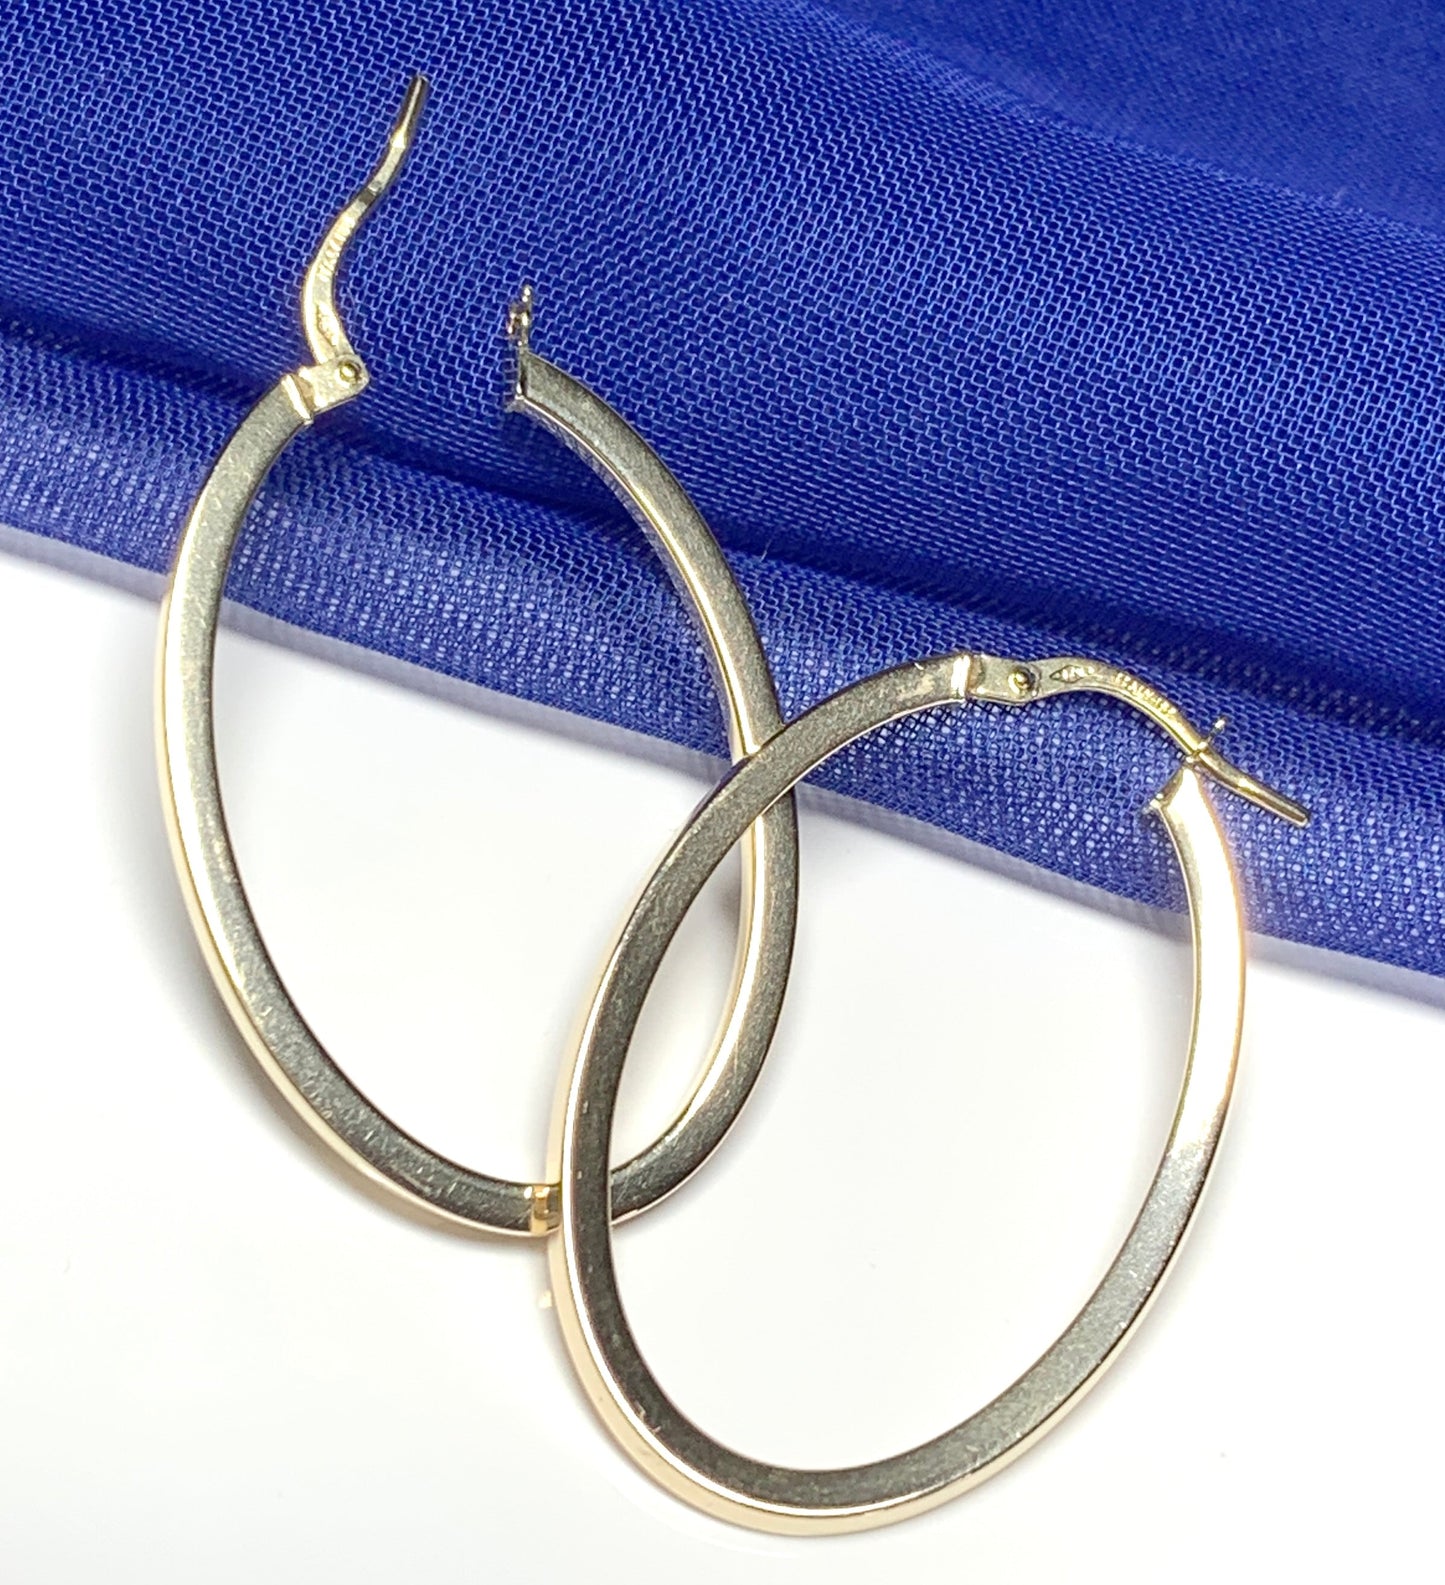 Yellow gold large oval hoop earrings plain polished